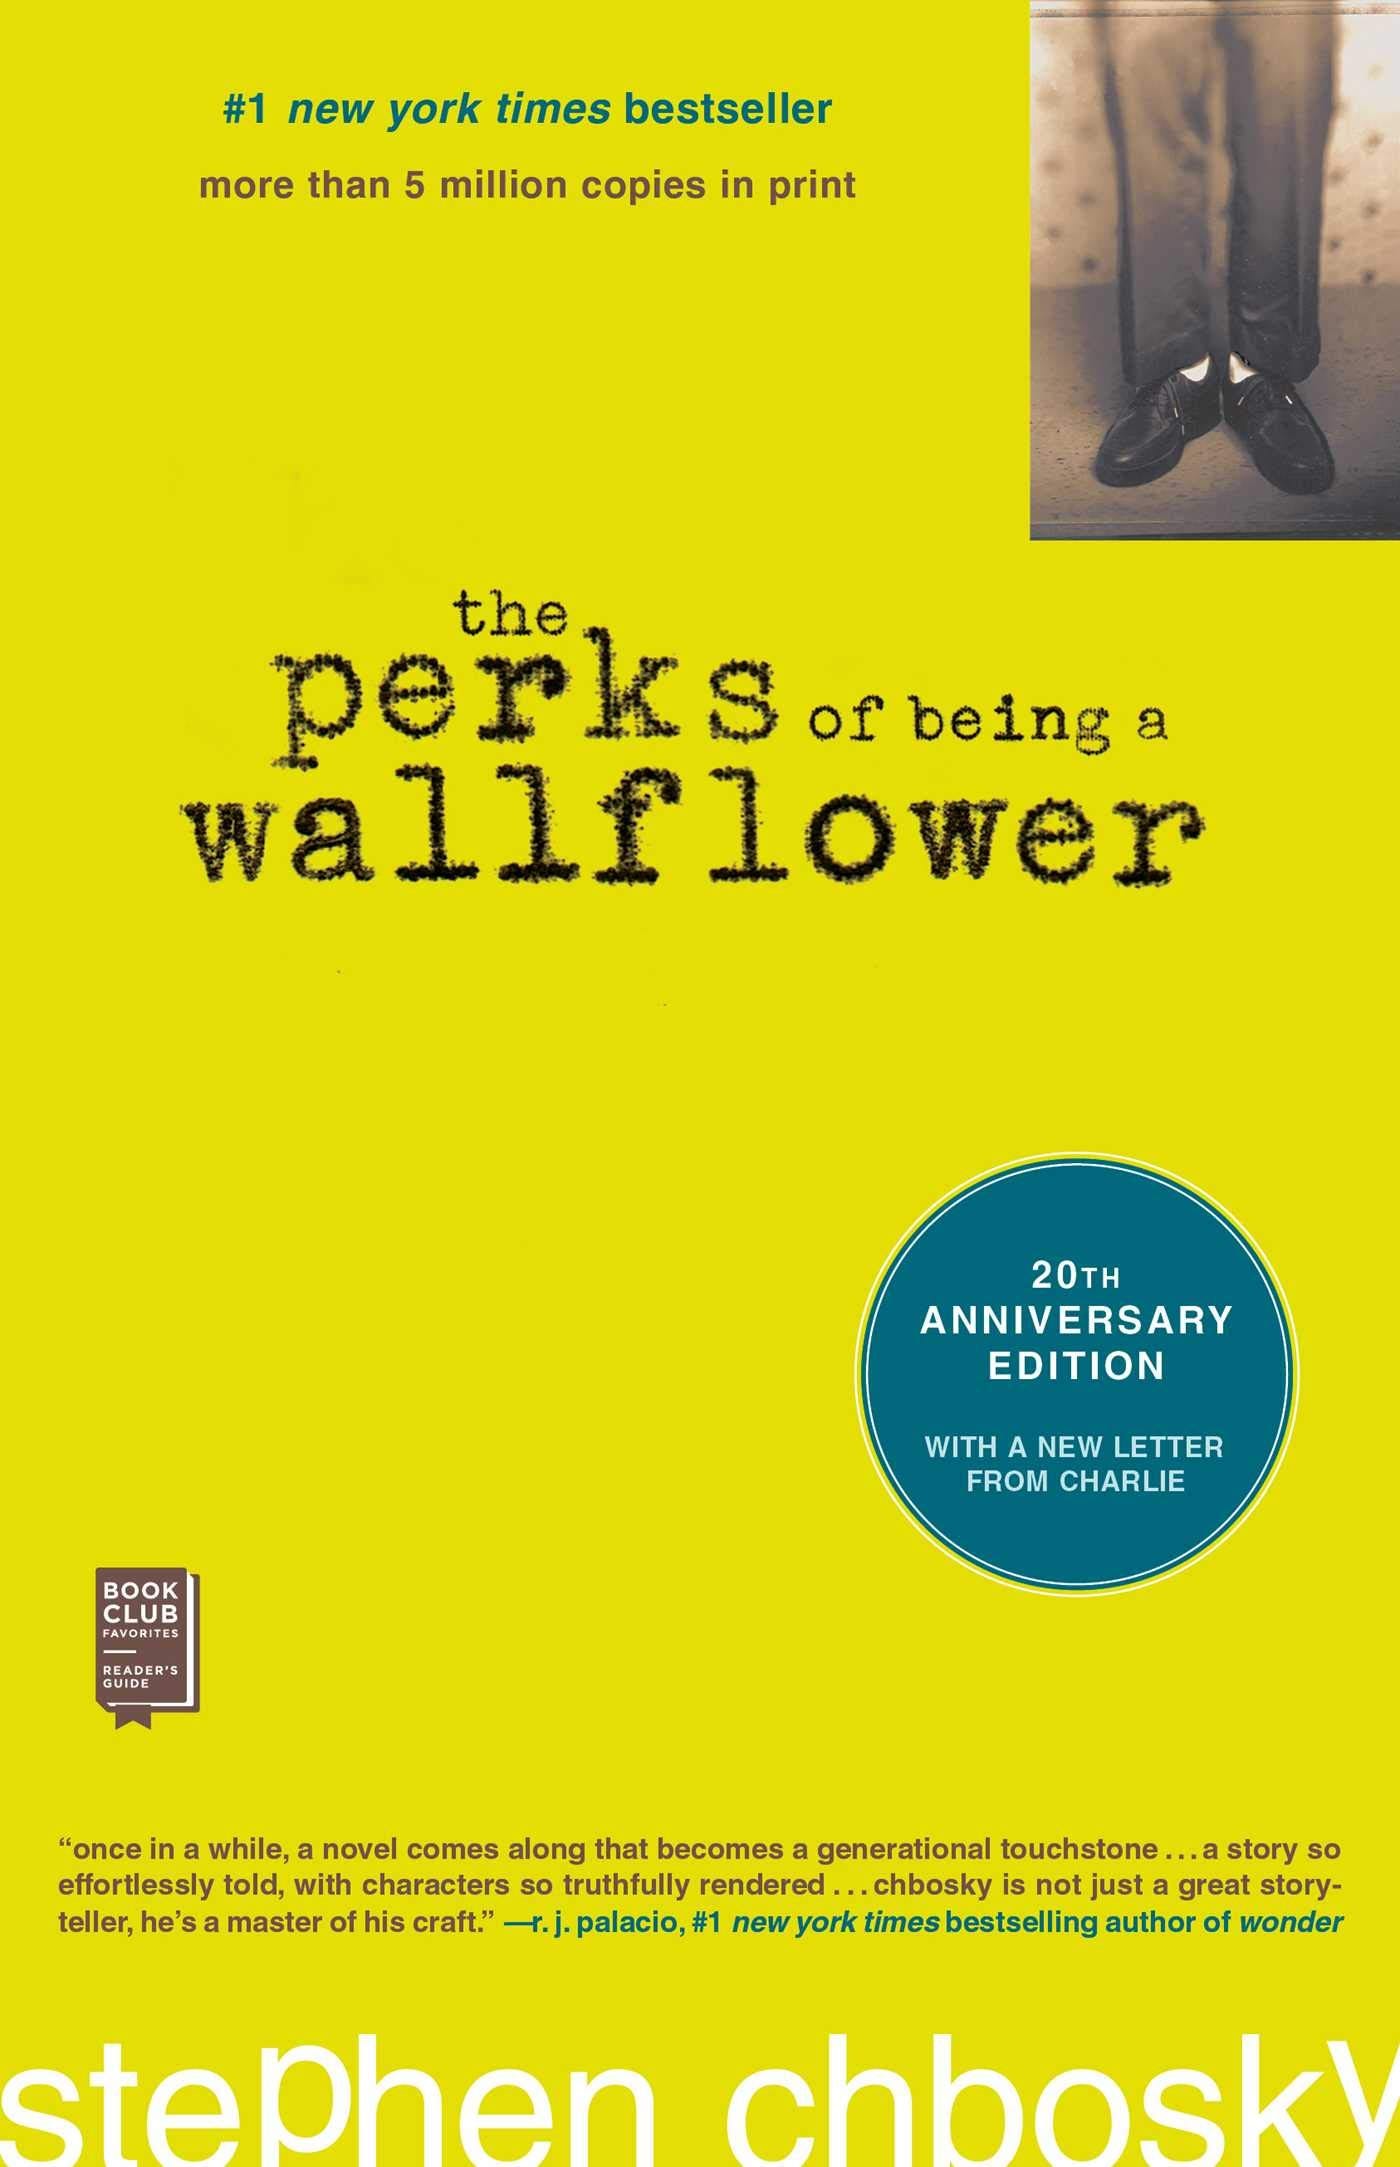 Buy The Perks of Being a Wallflower: 20th Anniversary Edition Book Online  at Low Prices in India | The Perks of Being a Wallflower: 20th Anniversary  Edition Reviews &amp; Ratings - Amazon.in